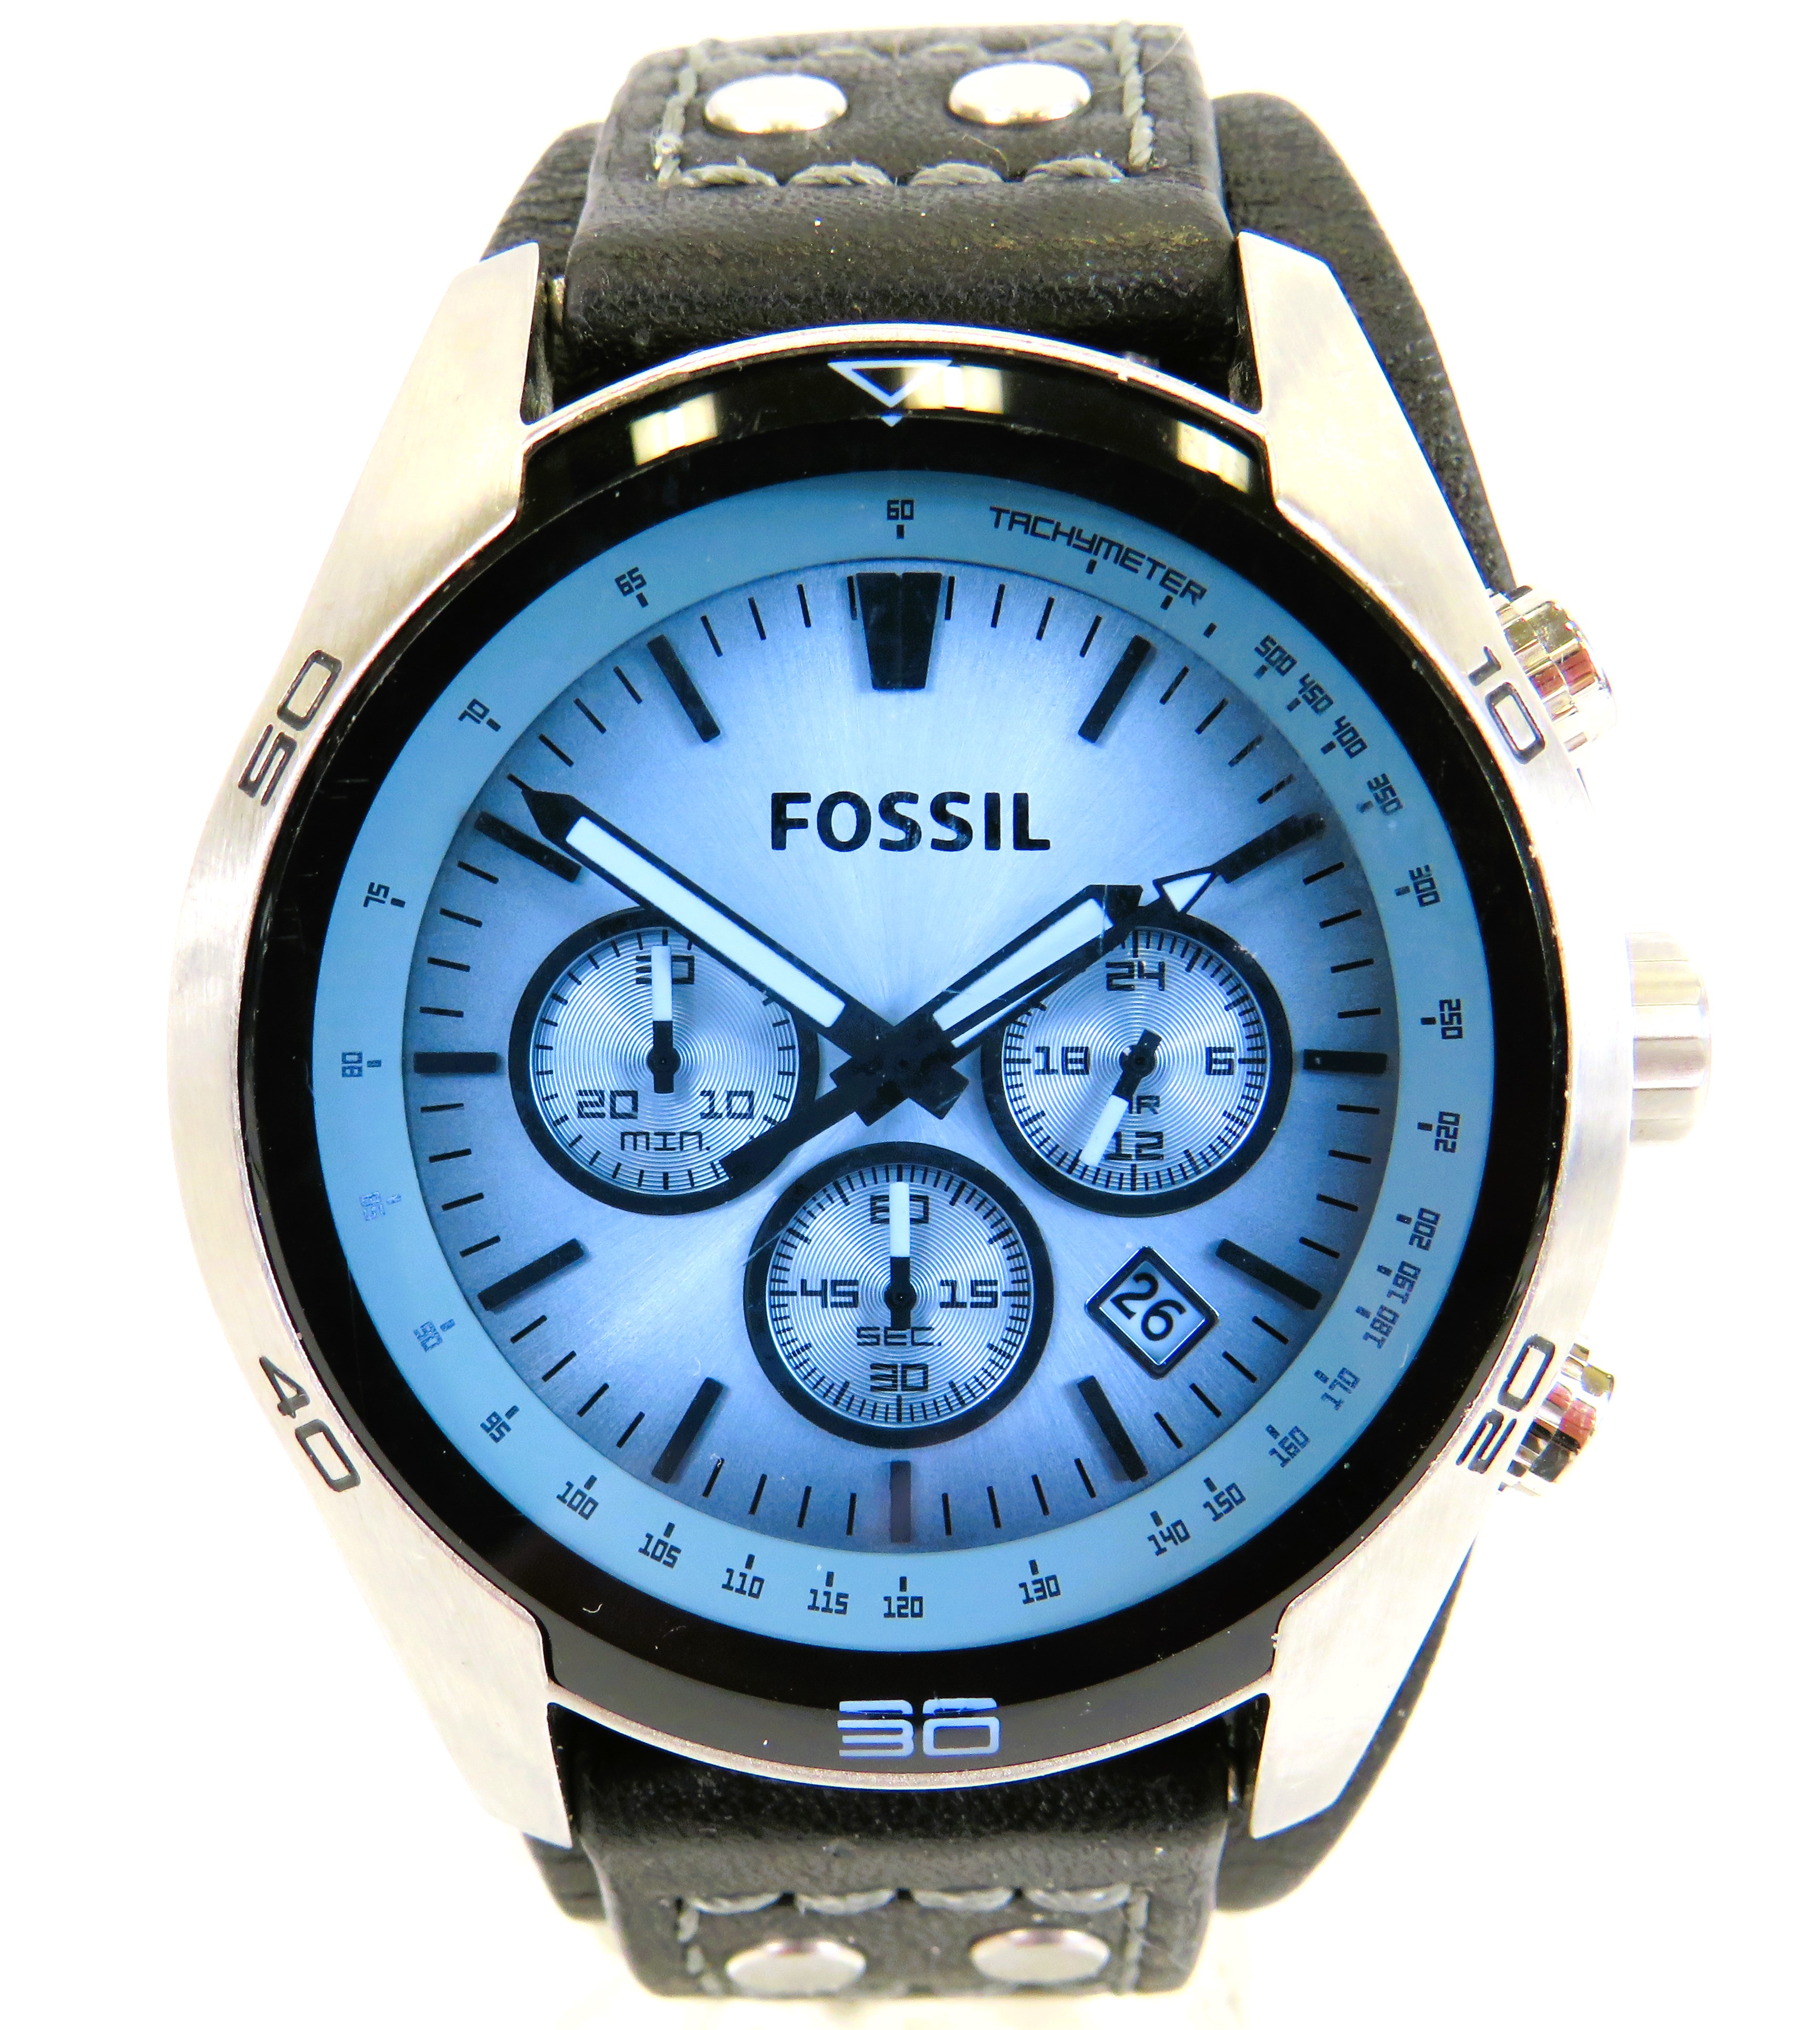 Gents Fossil Quartz Chronograph with thick leather strap in excellent conditon. Running order. See p